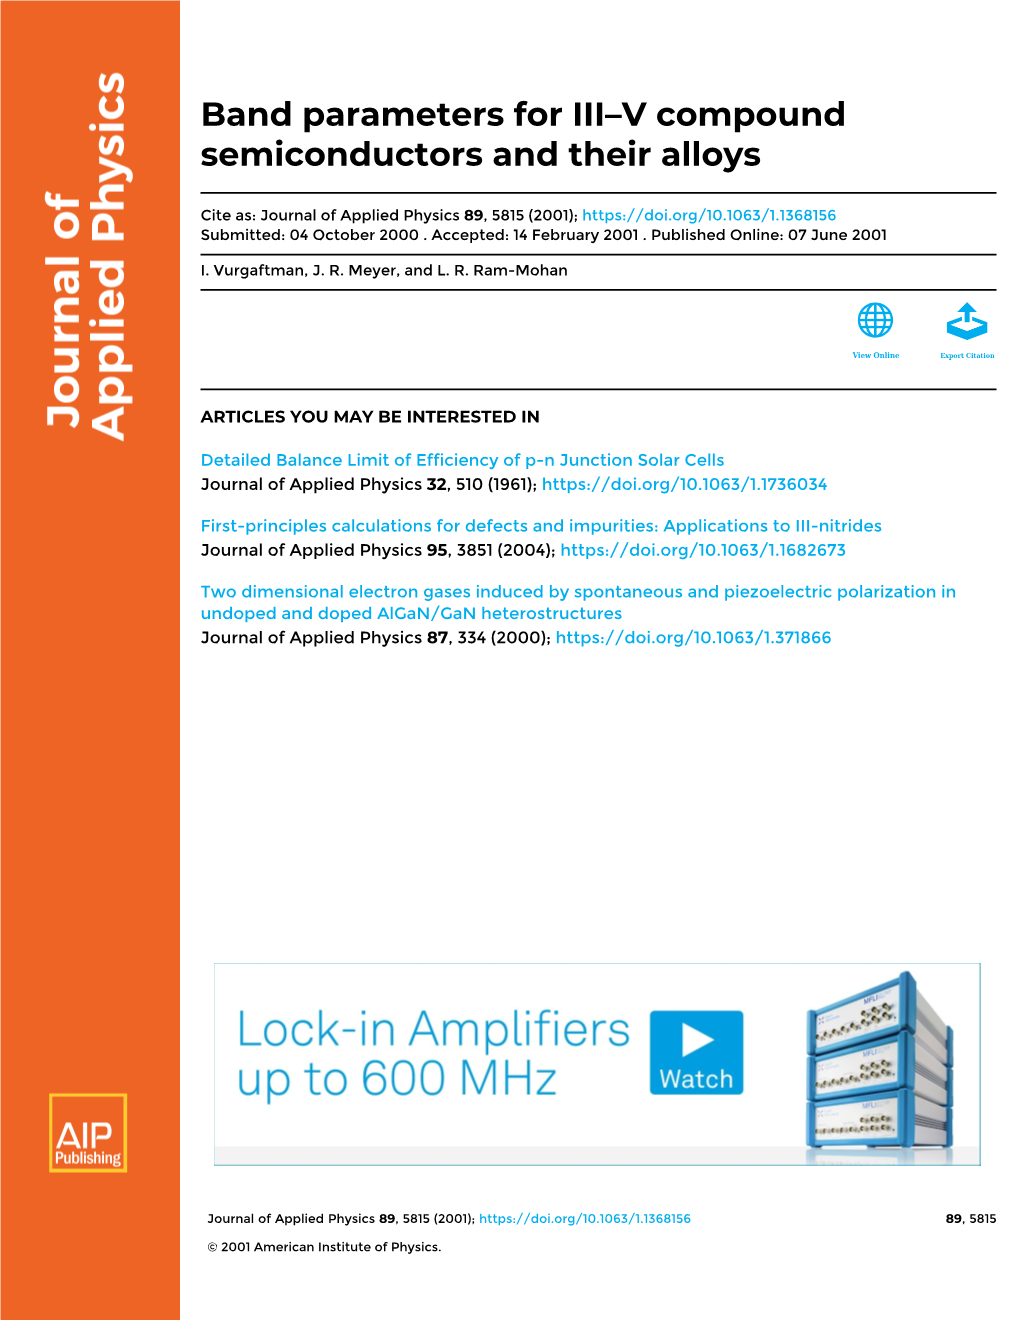 Band Parameters for III–V Compound Semiconductors and Their Alloys